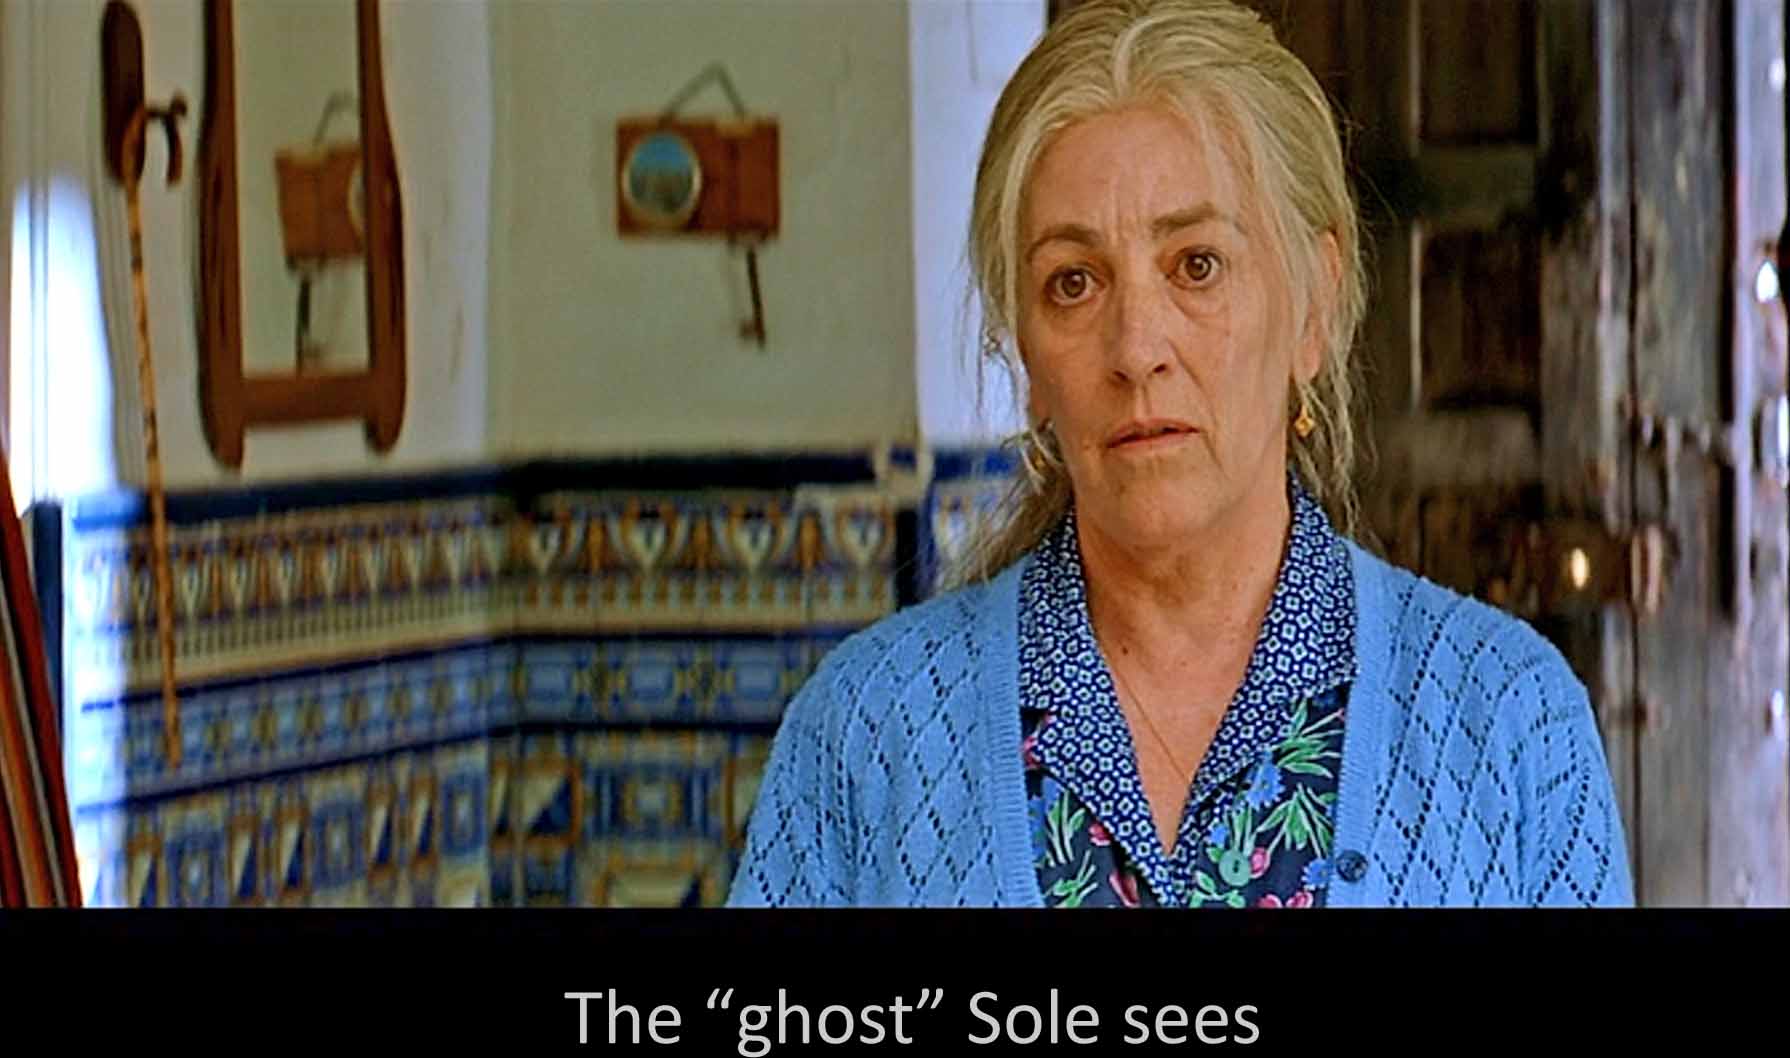 The ghost Sole sees